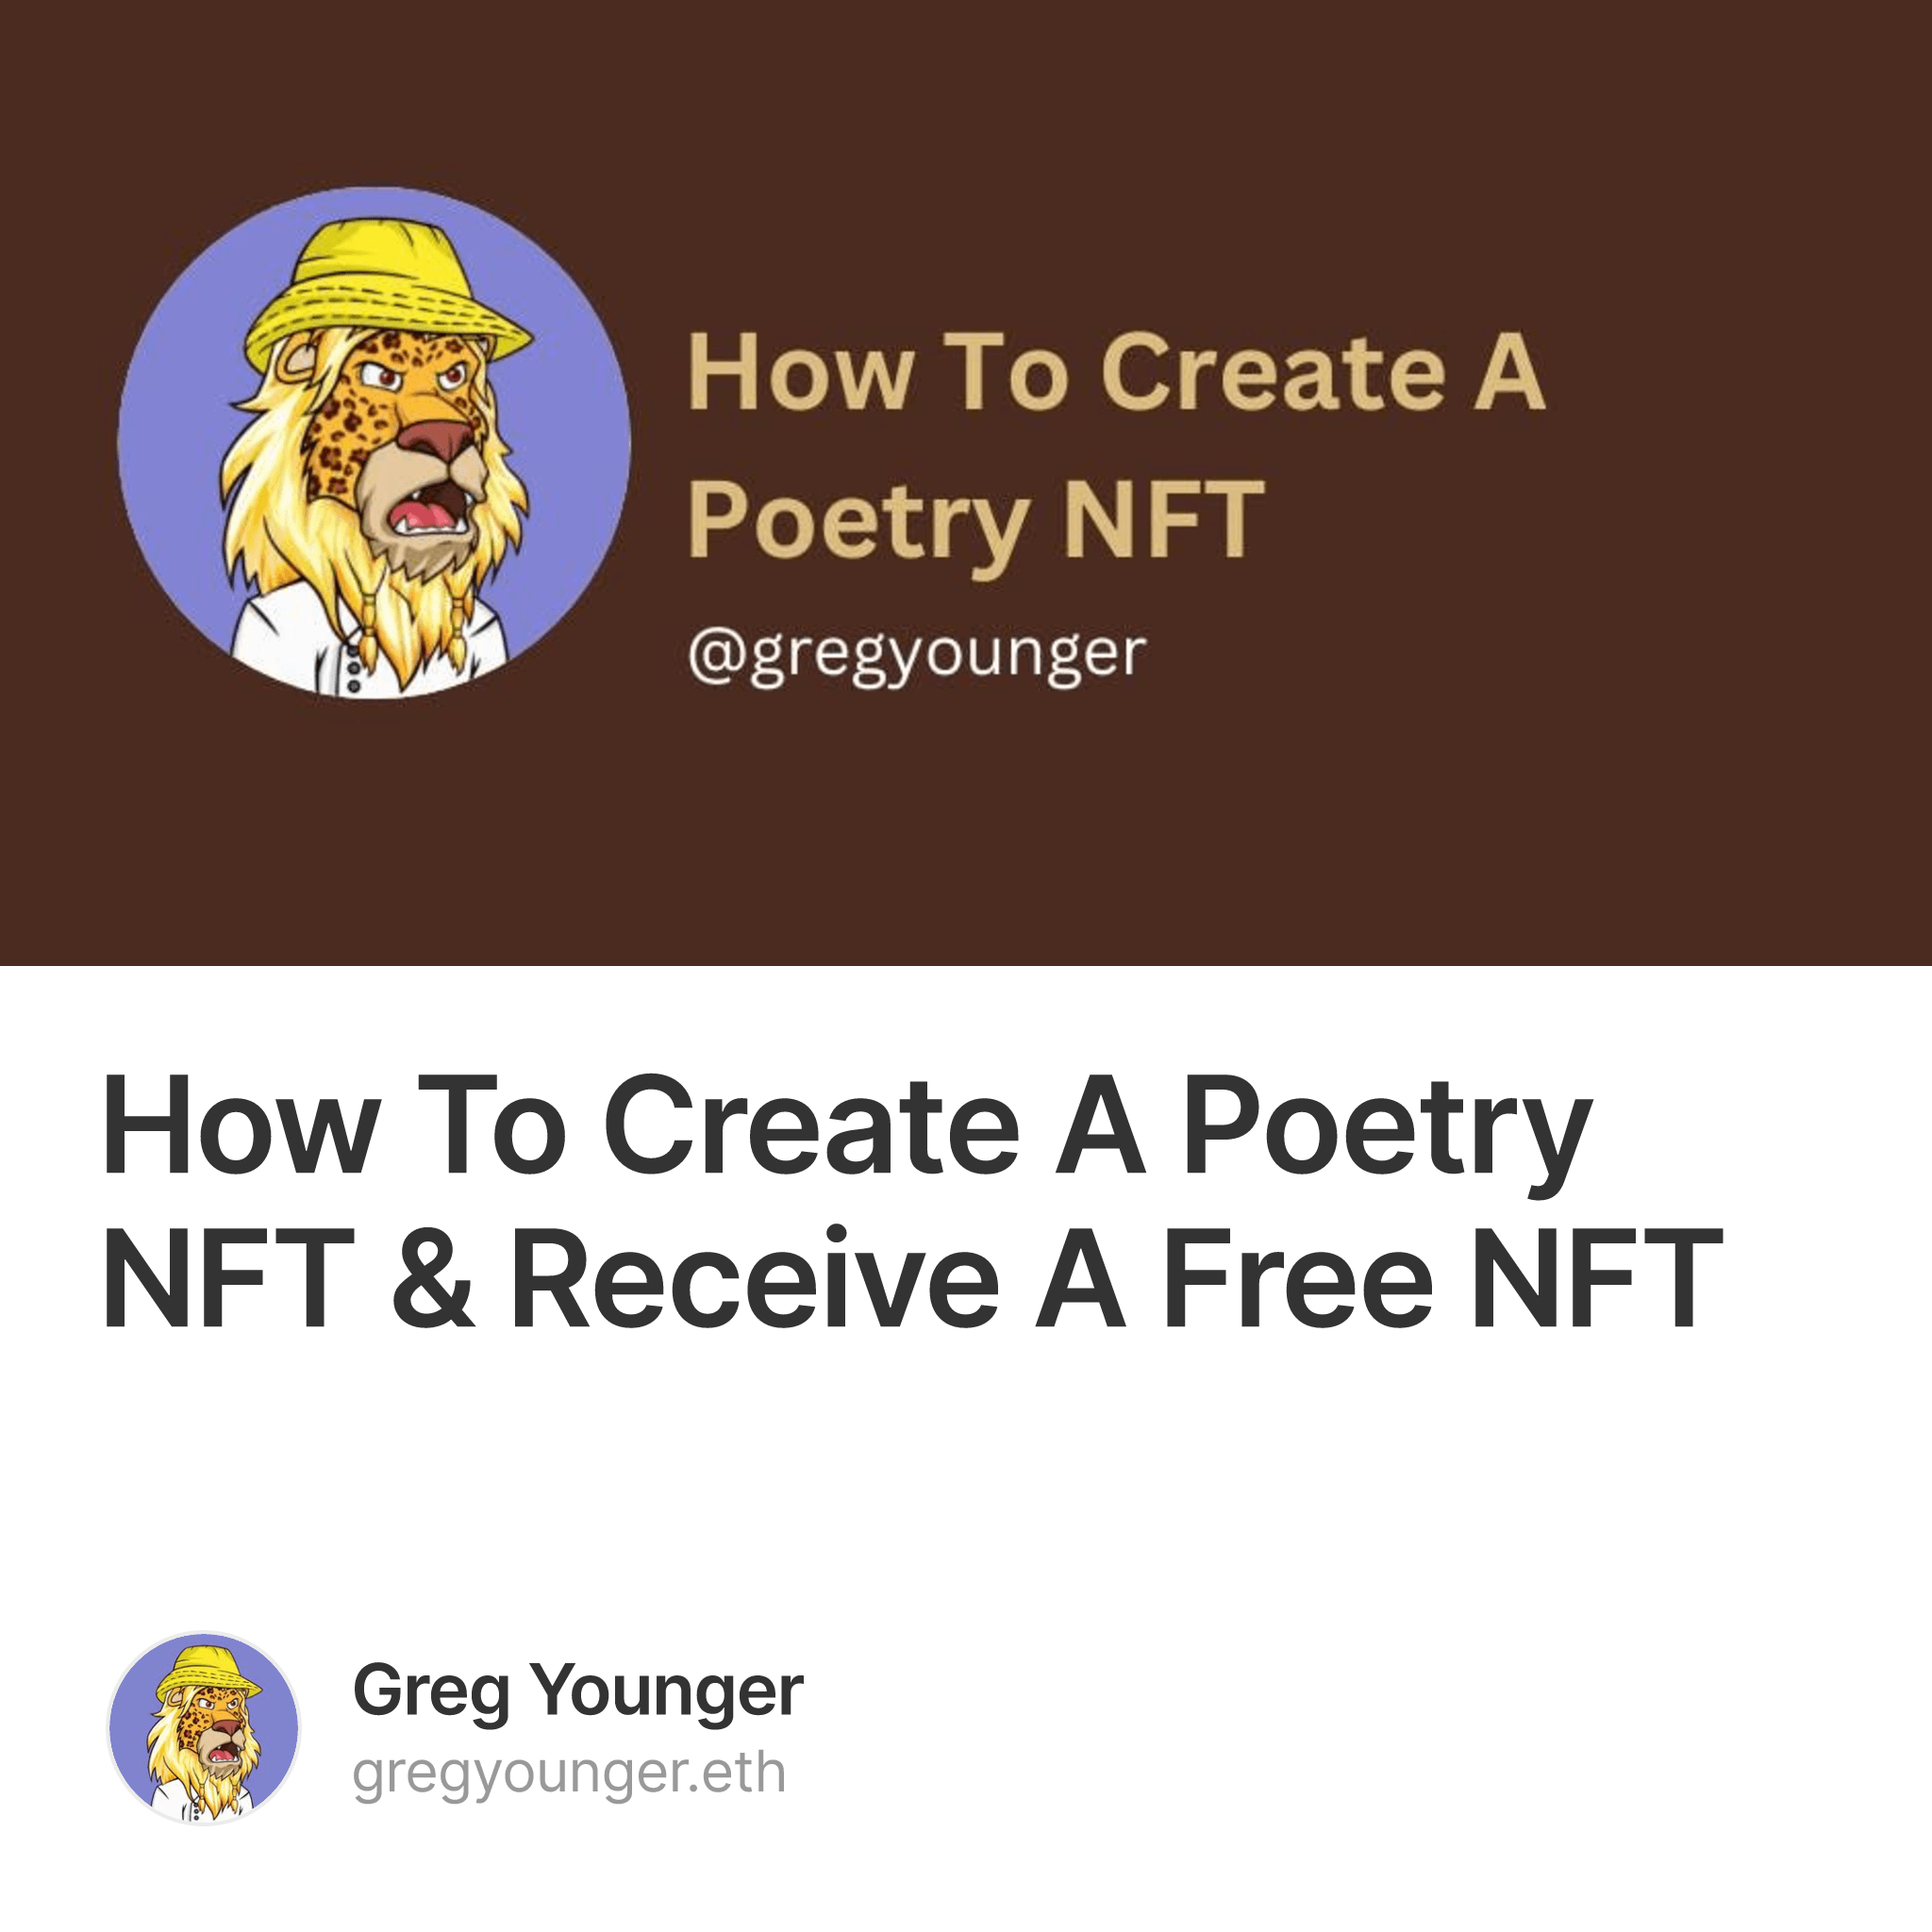 How To Create A Poetry NFT & Receive A Free NFT 8/10